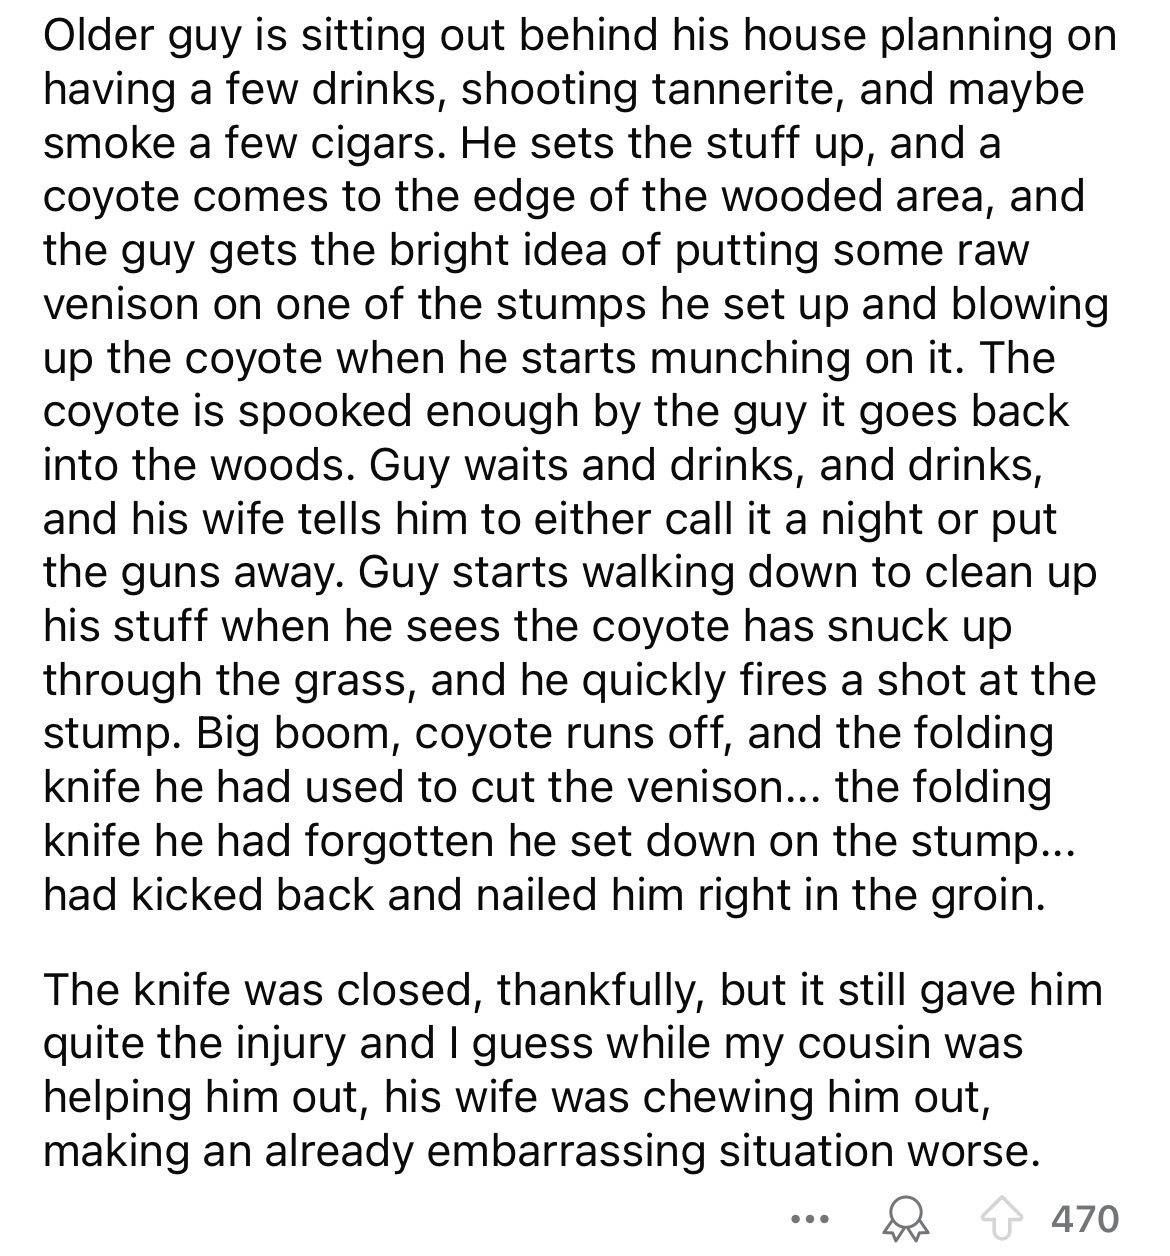 document - Older guy is sitting out behind his house planning on having a few drinks, shooting tannerite, and maybe smoke a few cigars. He sets the stuff up, and a coyote comes to the edge of the wooded area, and the guy gets the bright idea of putting so